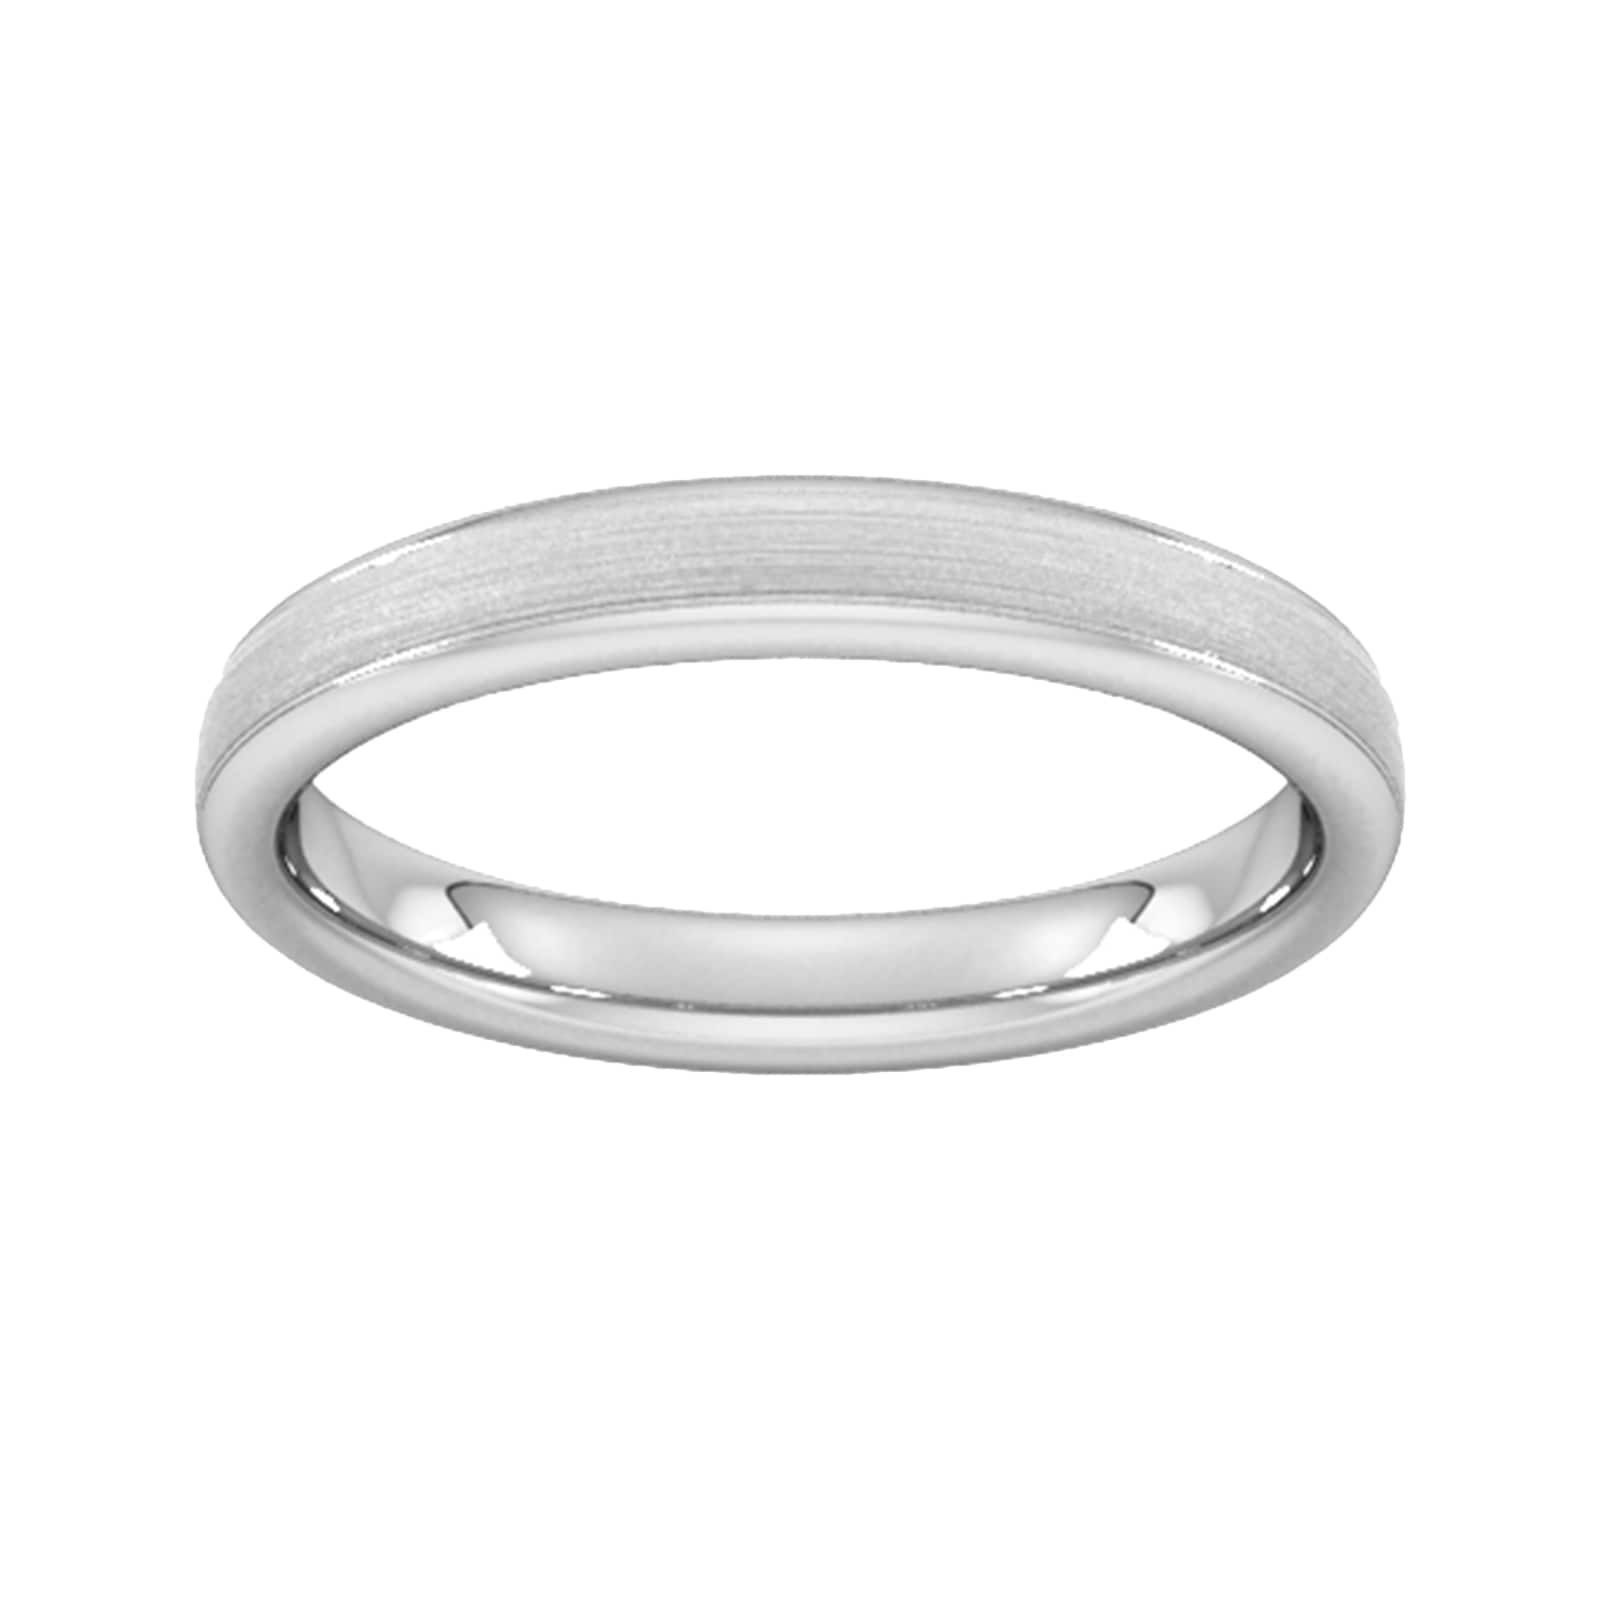 3mm Traditional Court Heavy Matt Centre With Grooves Wedding Ring In 9 Carat White Gold - Ring Size J